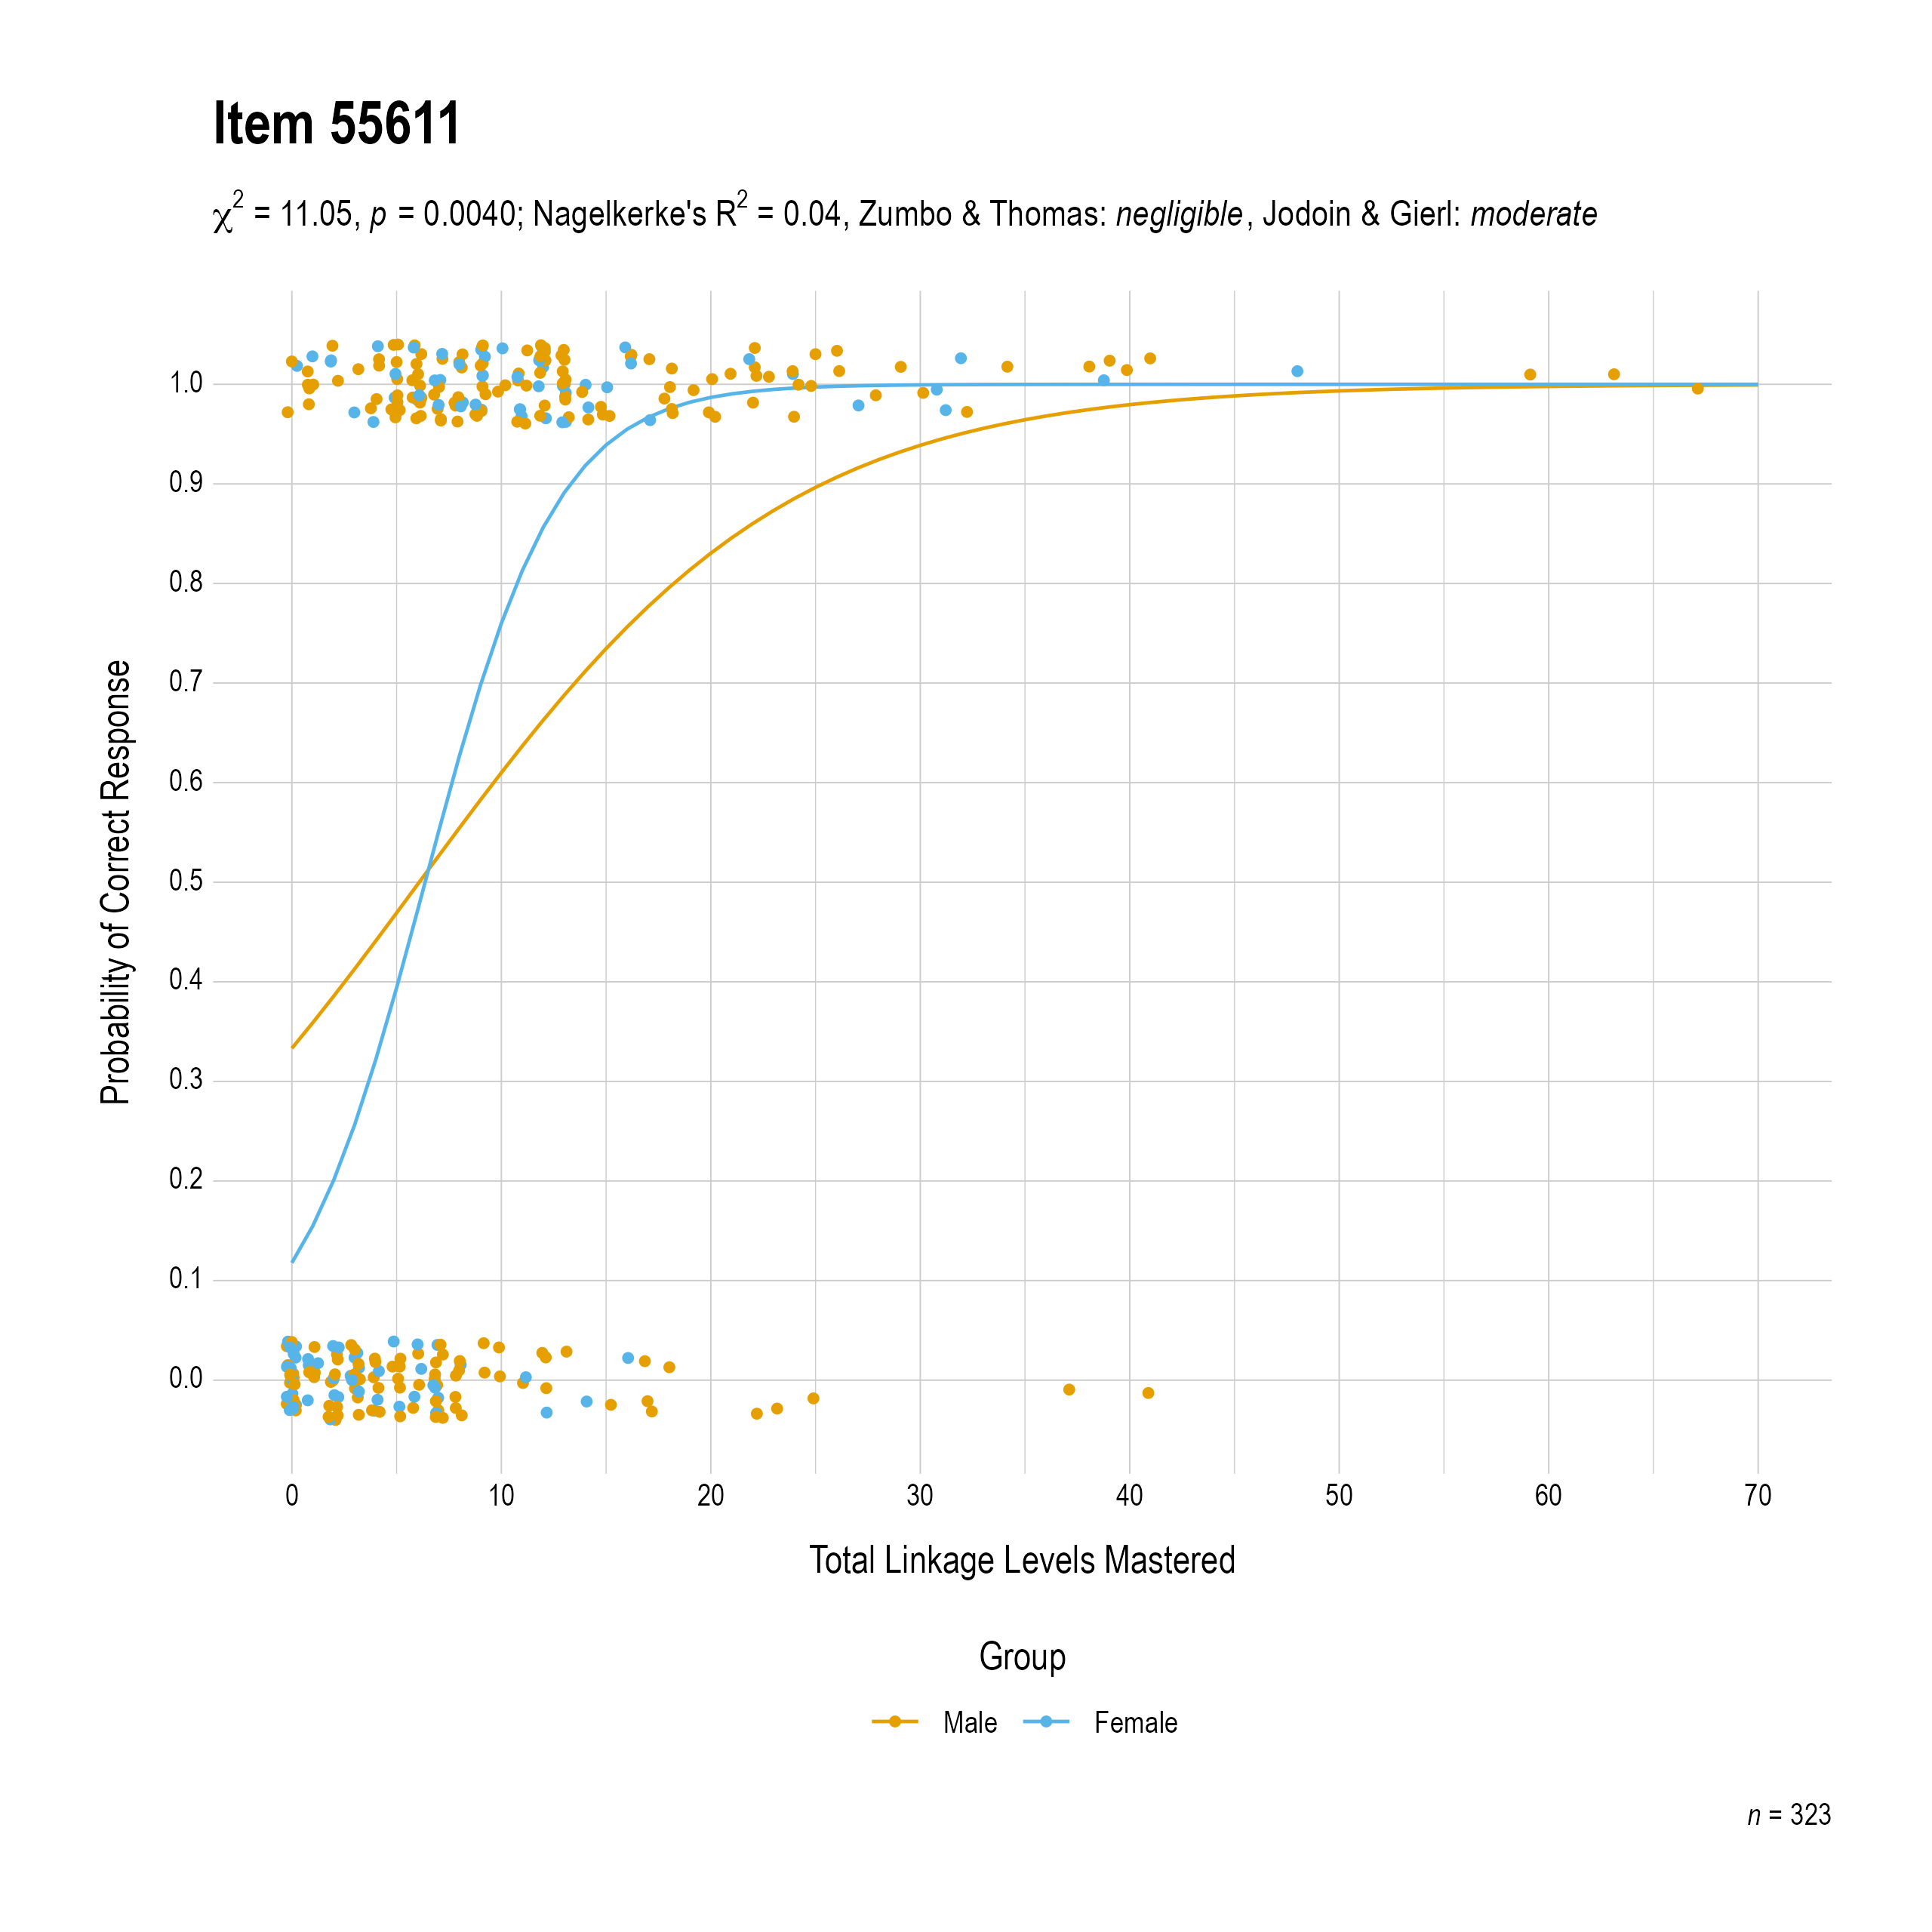 The plot of the combined gender differential item function evidence for English language arts item 55611. The figure contains points shaded by group. The figure also contains a logistic regression curve for each group. The total linkage levels mastered in is on the x-axis, and the probability of a correct response is on the y-axis.